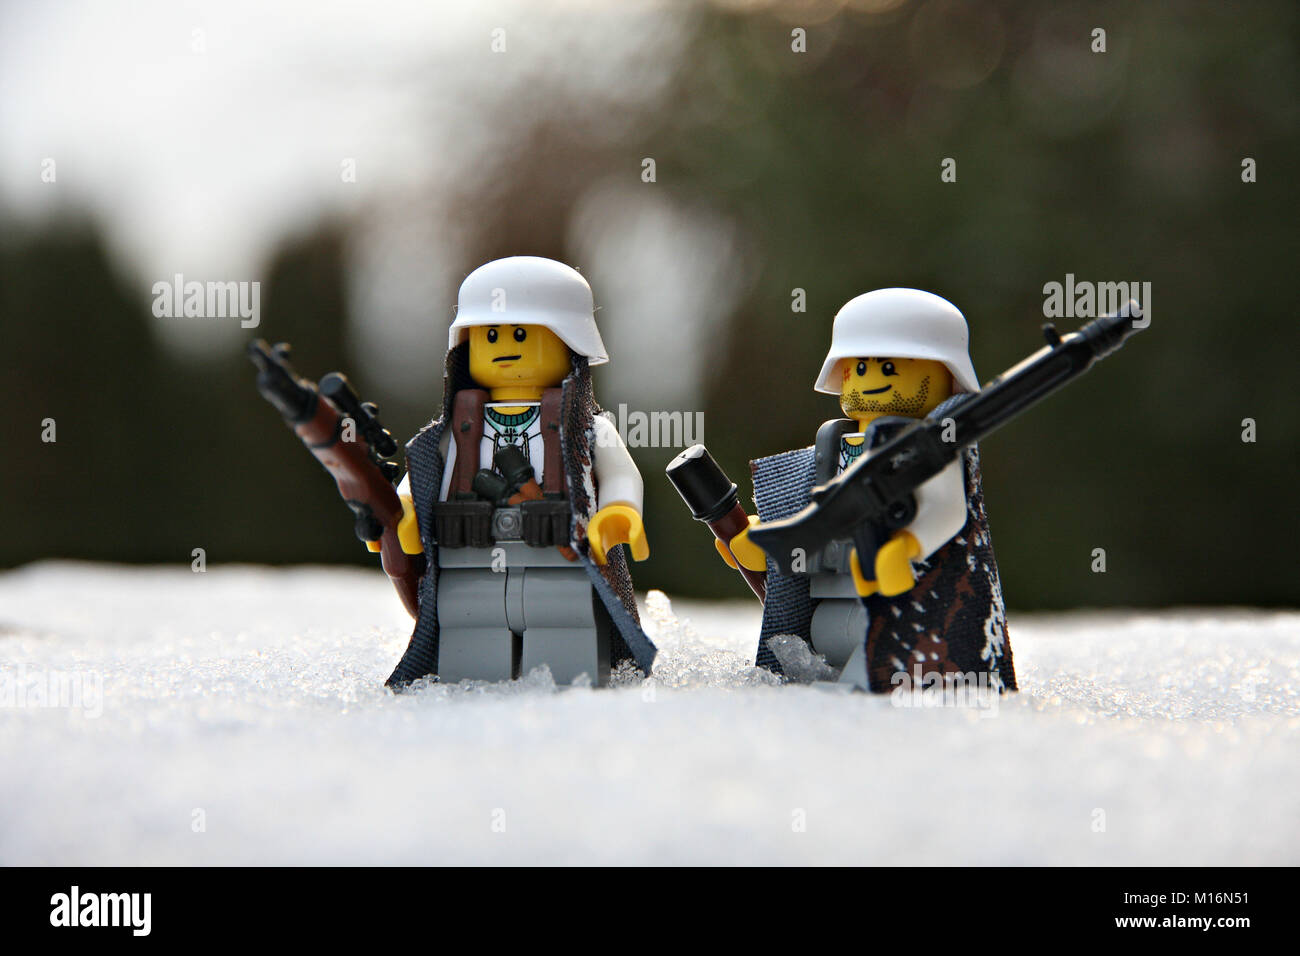 Lego Snowman High Resolution Stock Photography and Images - Alamy